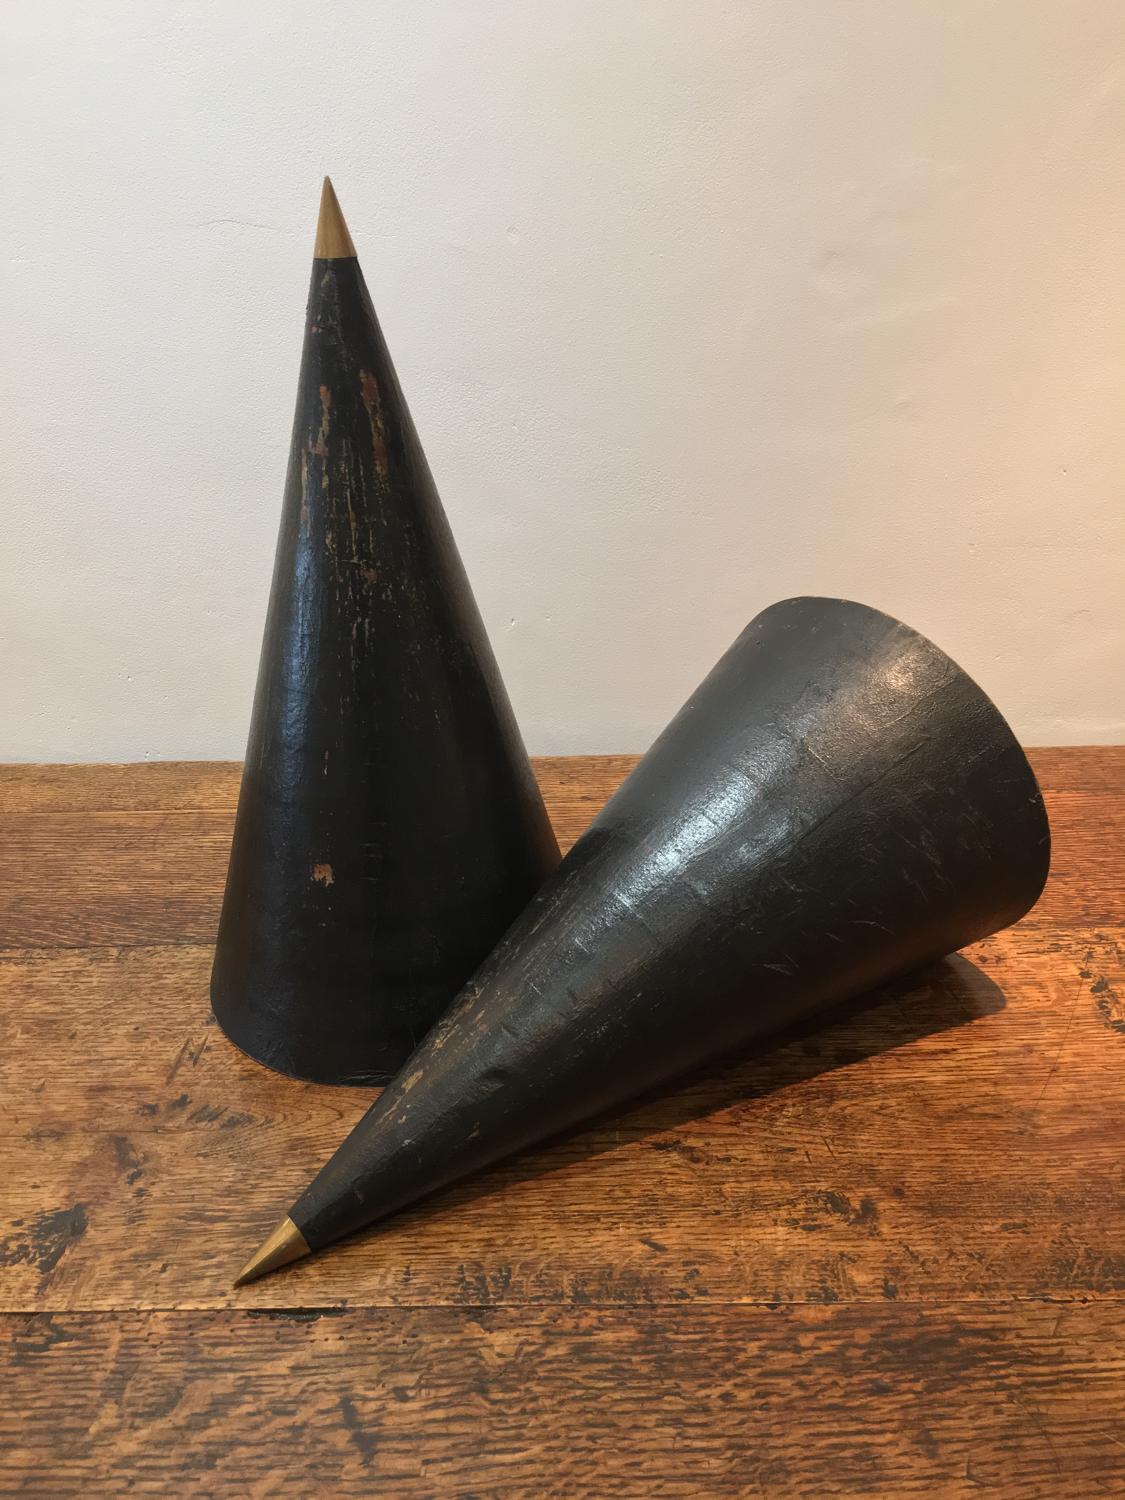 A pair of Conical architectural forms